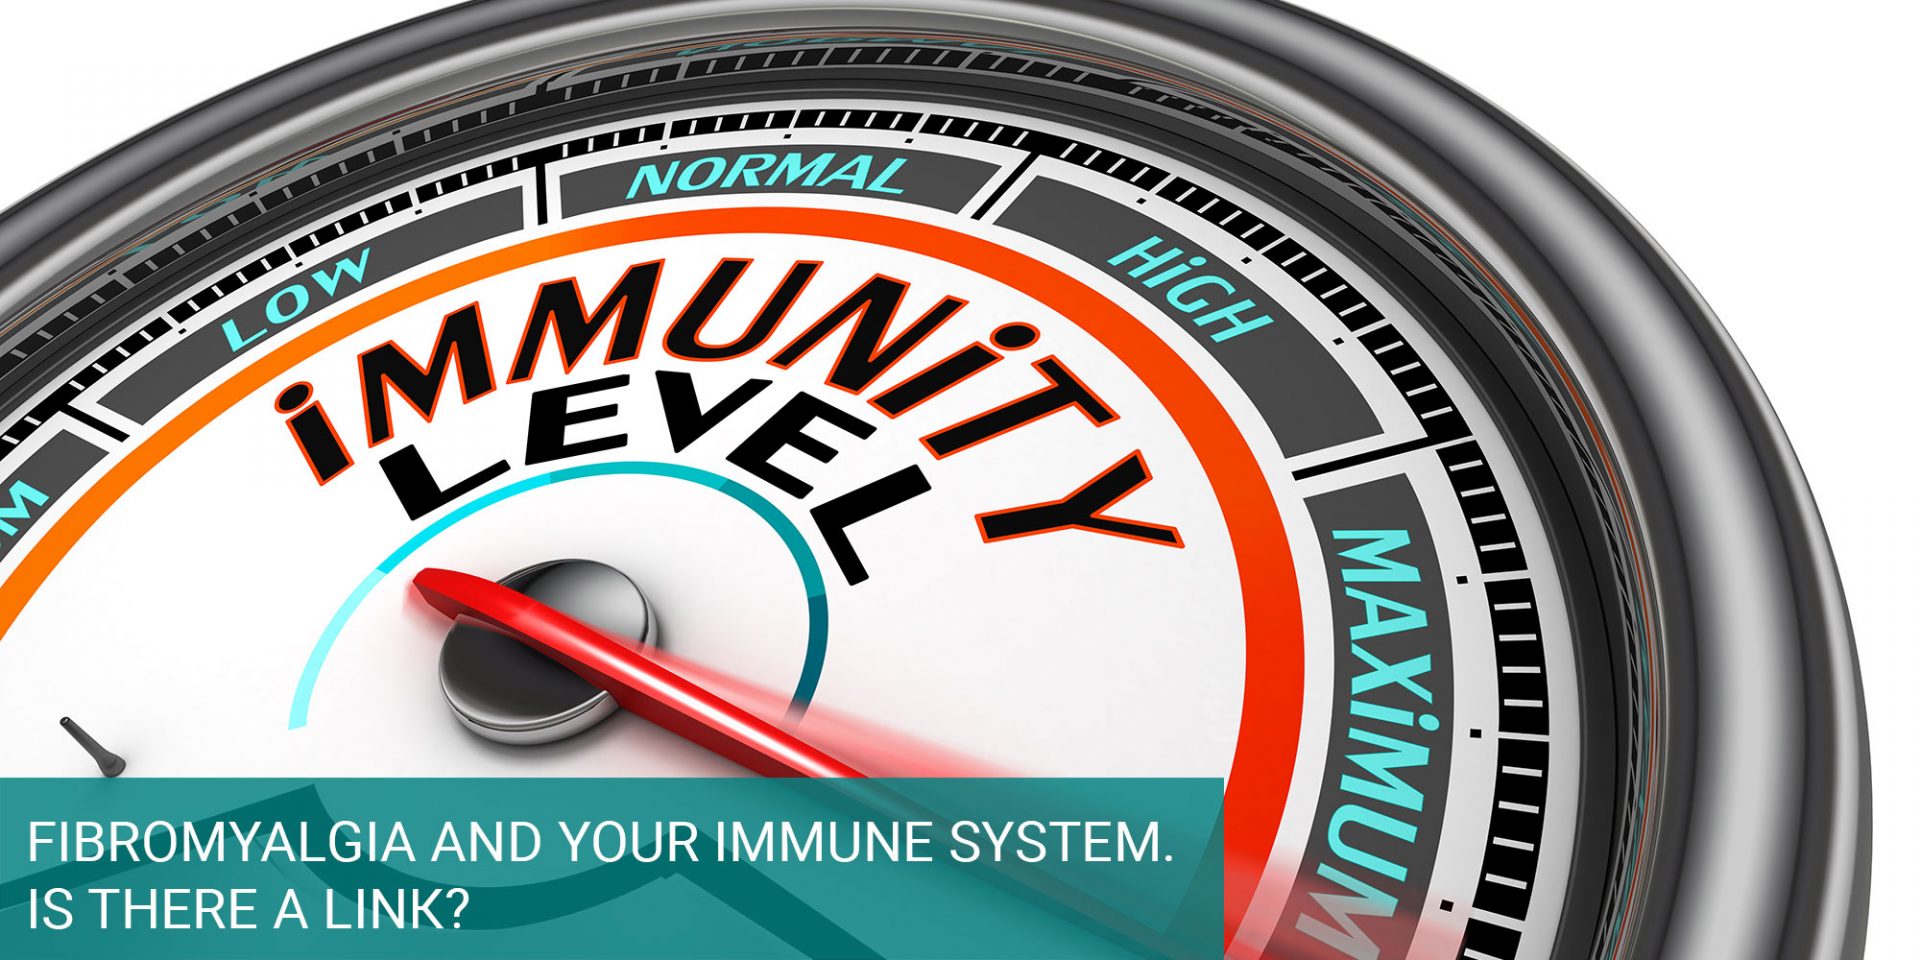 Fibromyalgia and Your Immune System